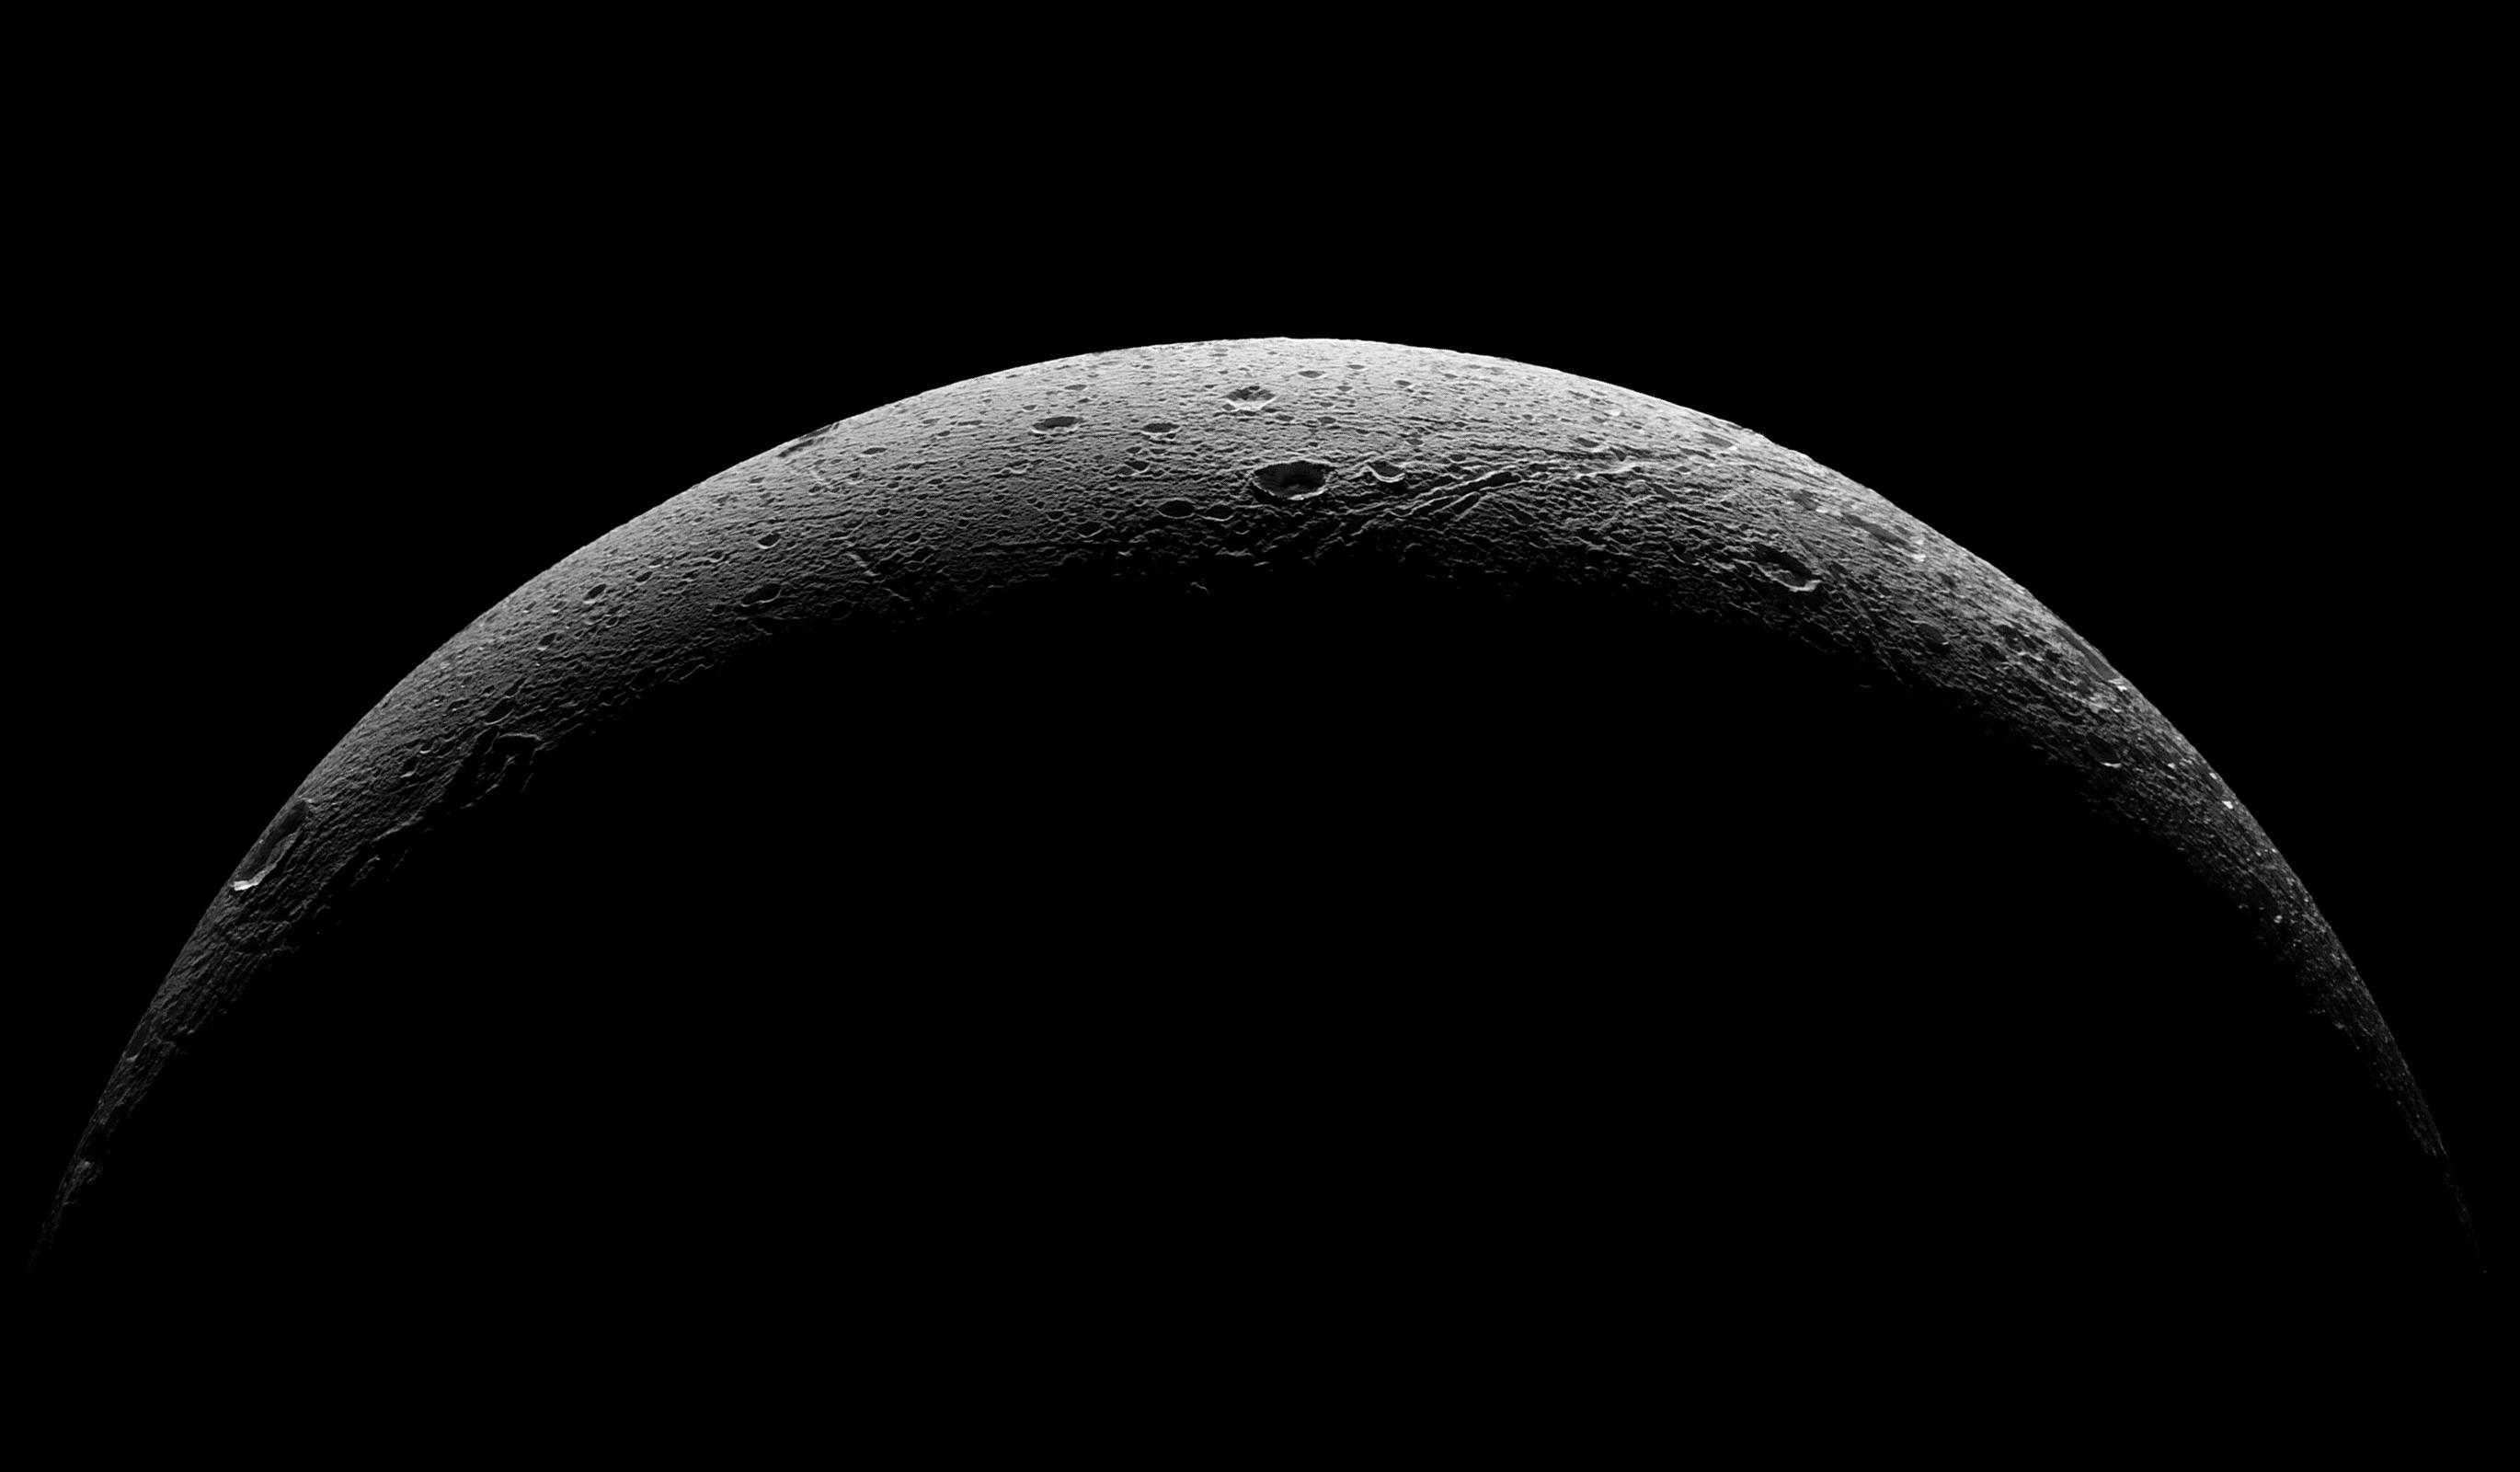 NASA's Cassini spacecraft captured this parting view showing the rough and icy crescent of Saturn's moon Dione following the spacecraft's last close flyby of the moon on Aug. 17, 2015.